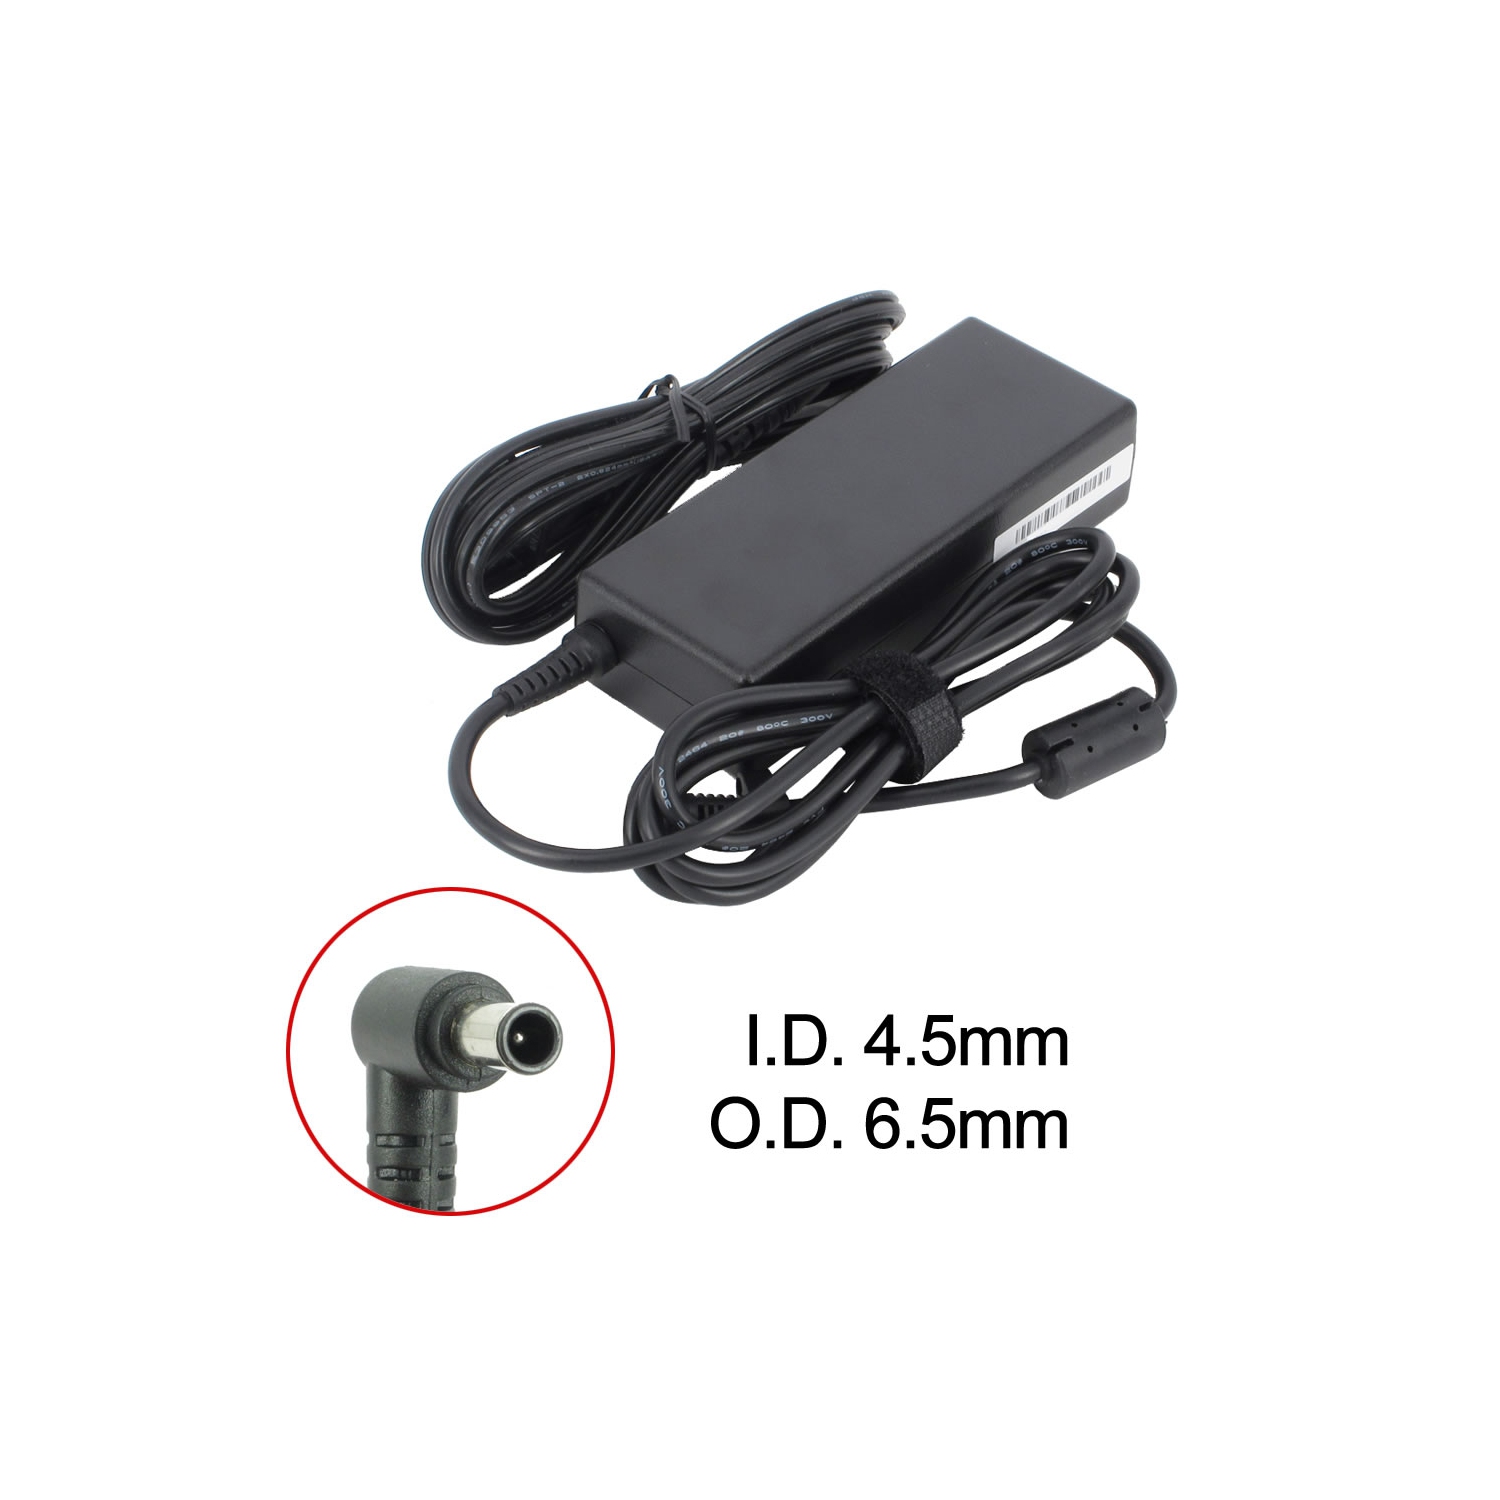 Brand New Laptop AC Adapter for Sony VAIO VGN-S4M/S, PCGA-AC19V12, VGP-AC19V11, VGP-AC19V22, VGP-AC19V32, VGP-AC19V71